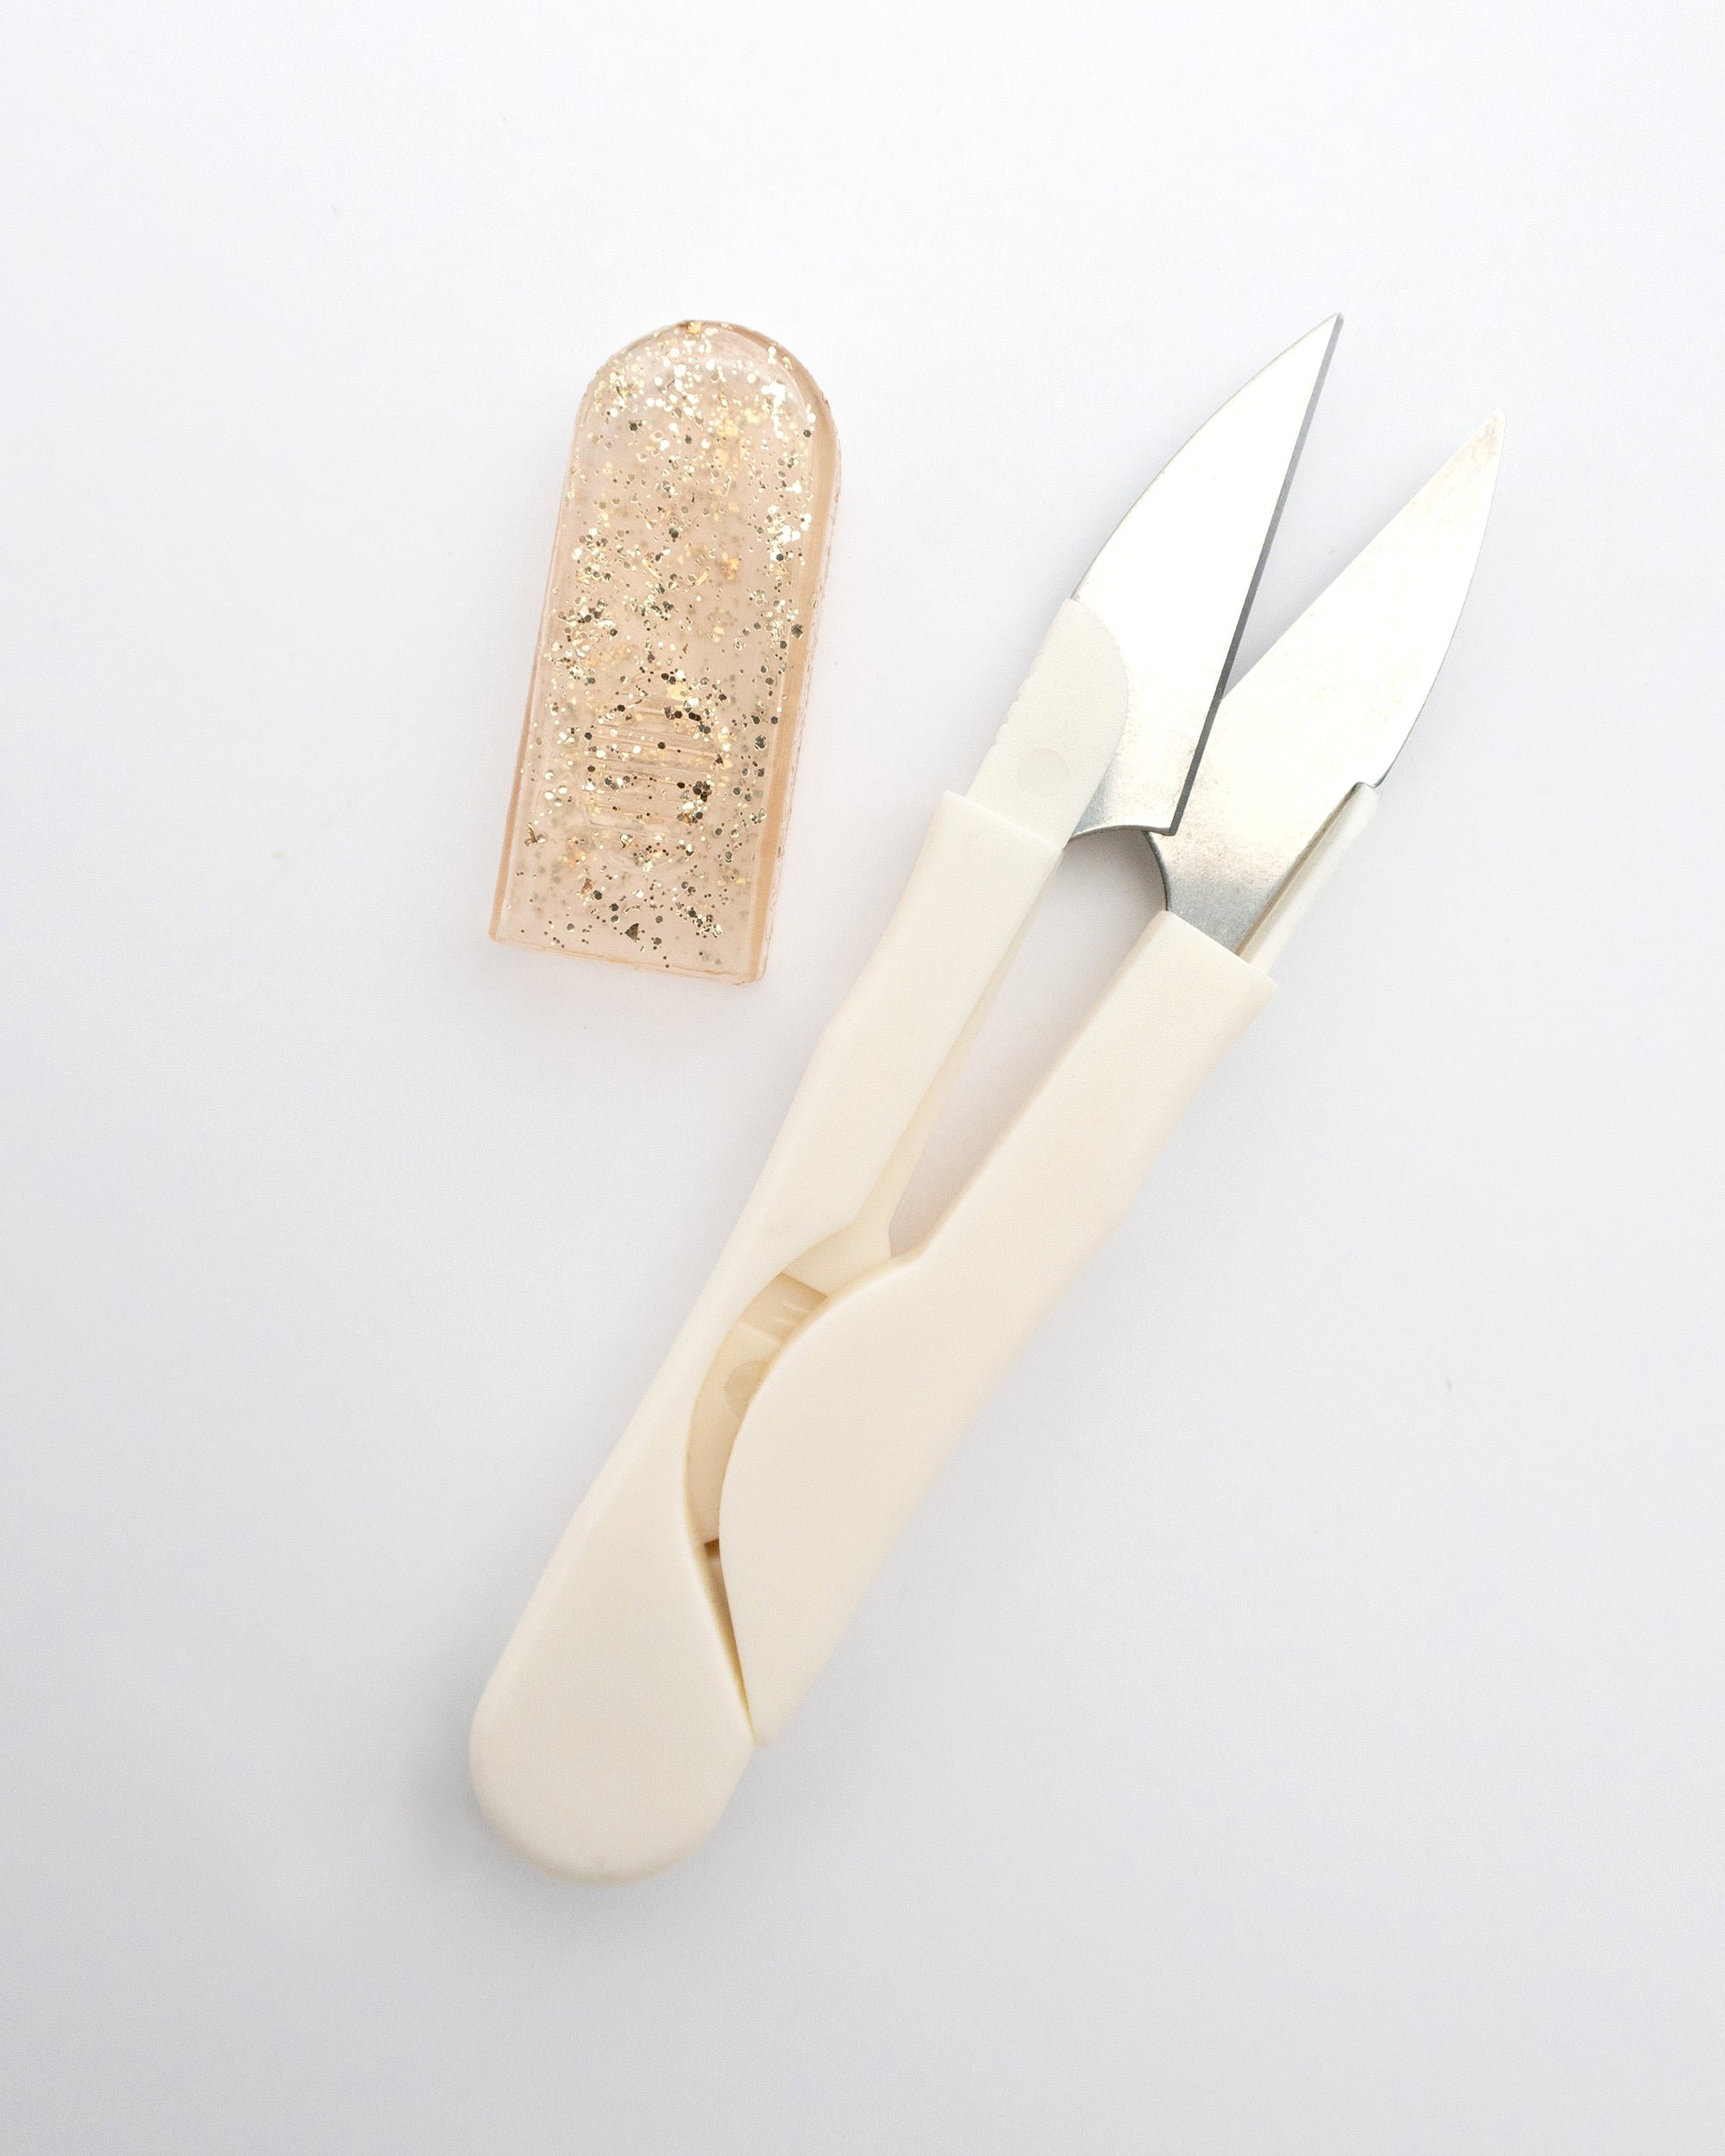 Embroidery & Sewing Snips with Case, Gold and Cream – Emily June